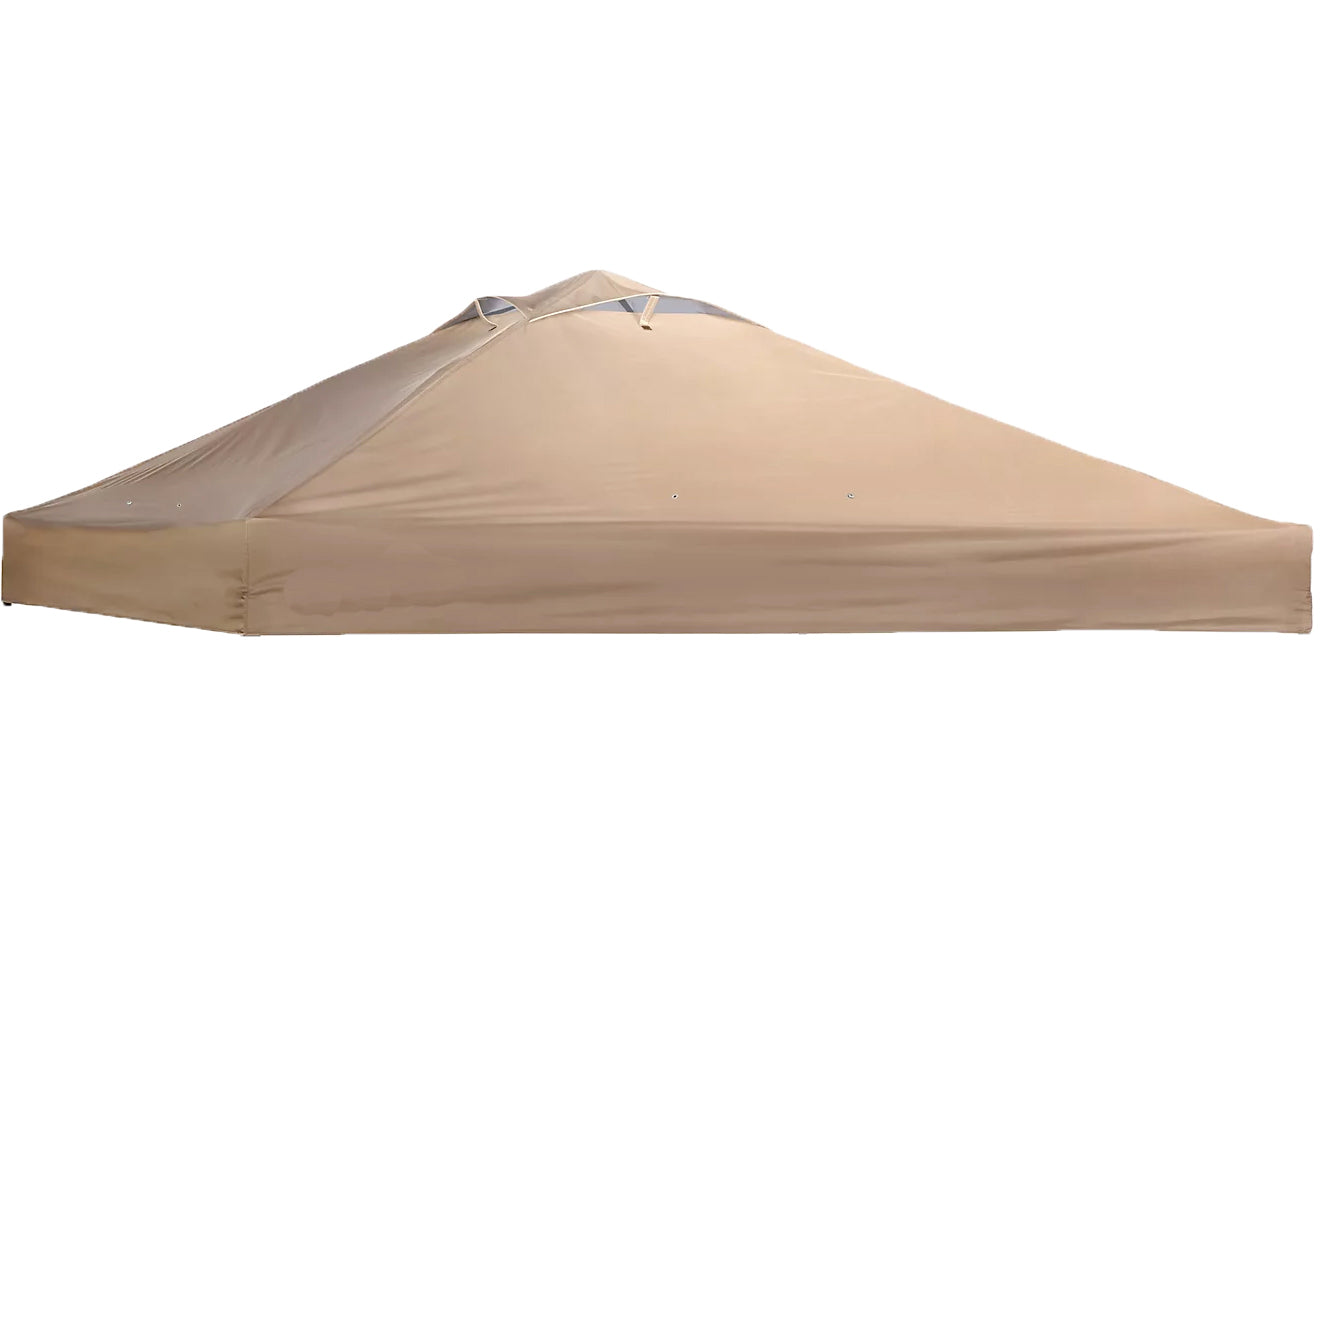 Canopy Top for Academy Sports + Outdoors 10' x 10' One Push Straight Leg Canopy Shelter Gazebo Tent Replacement Parts